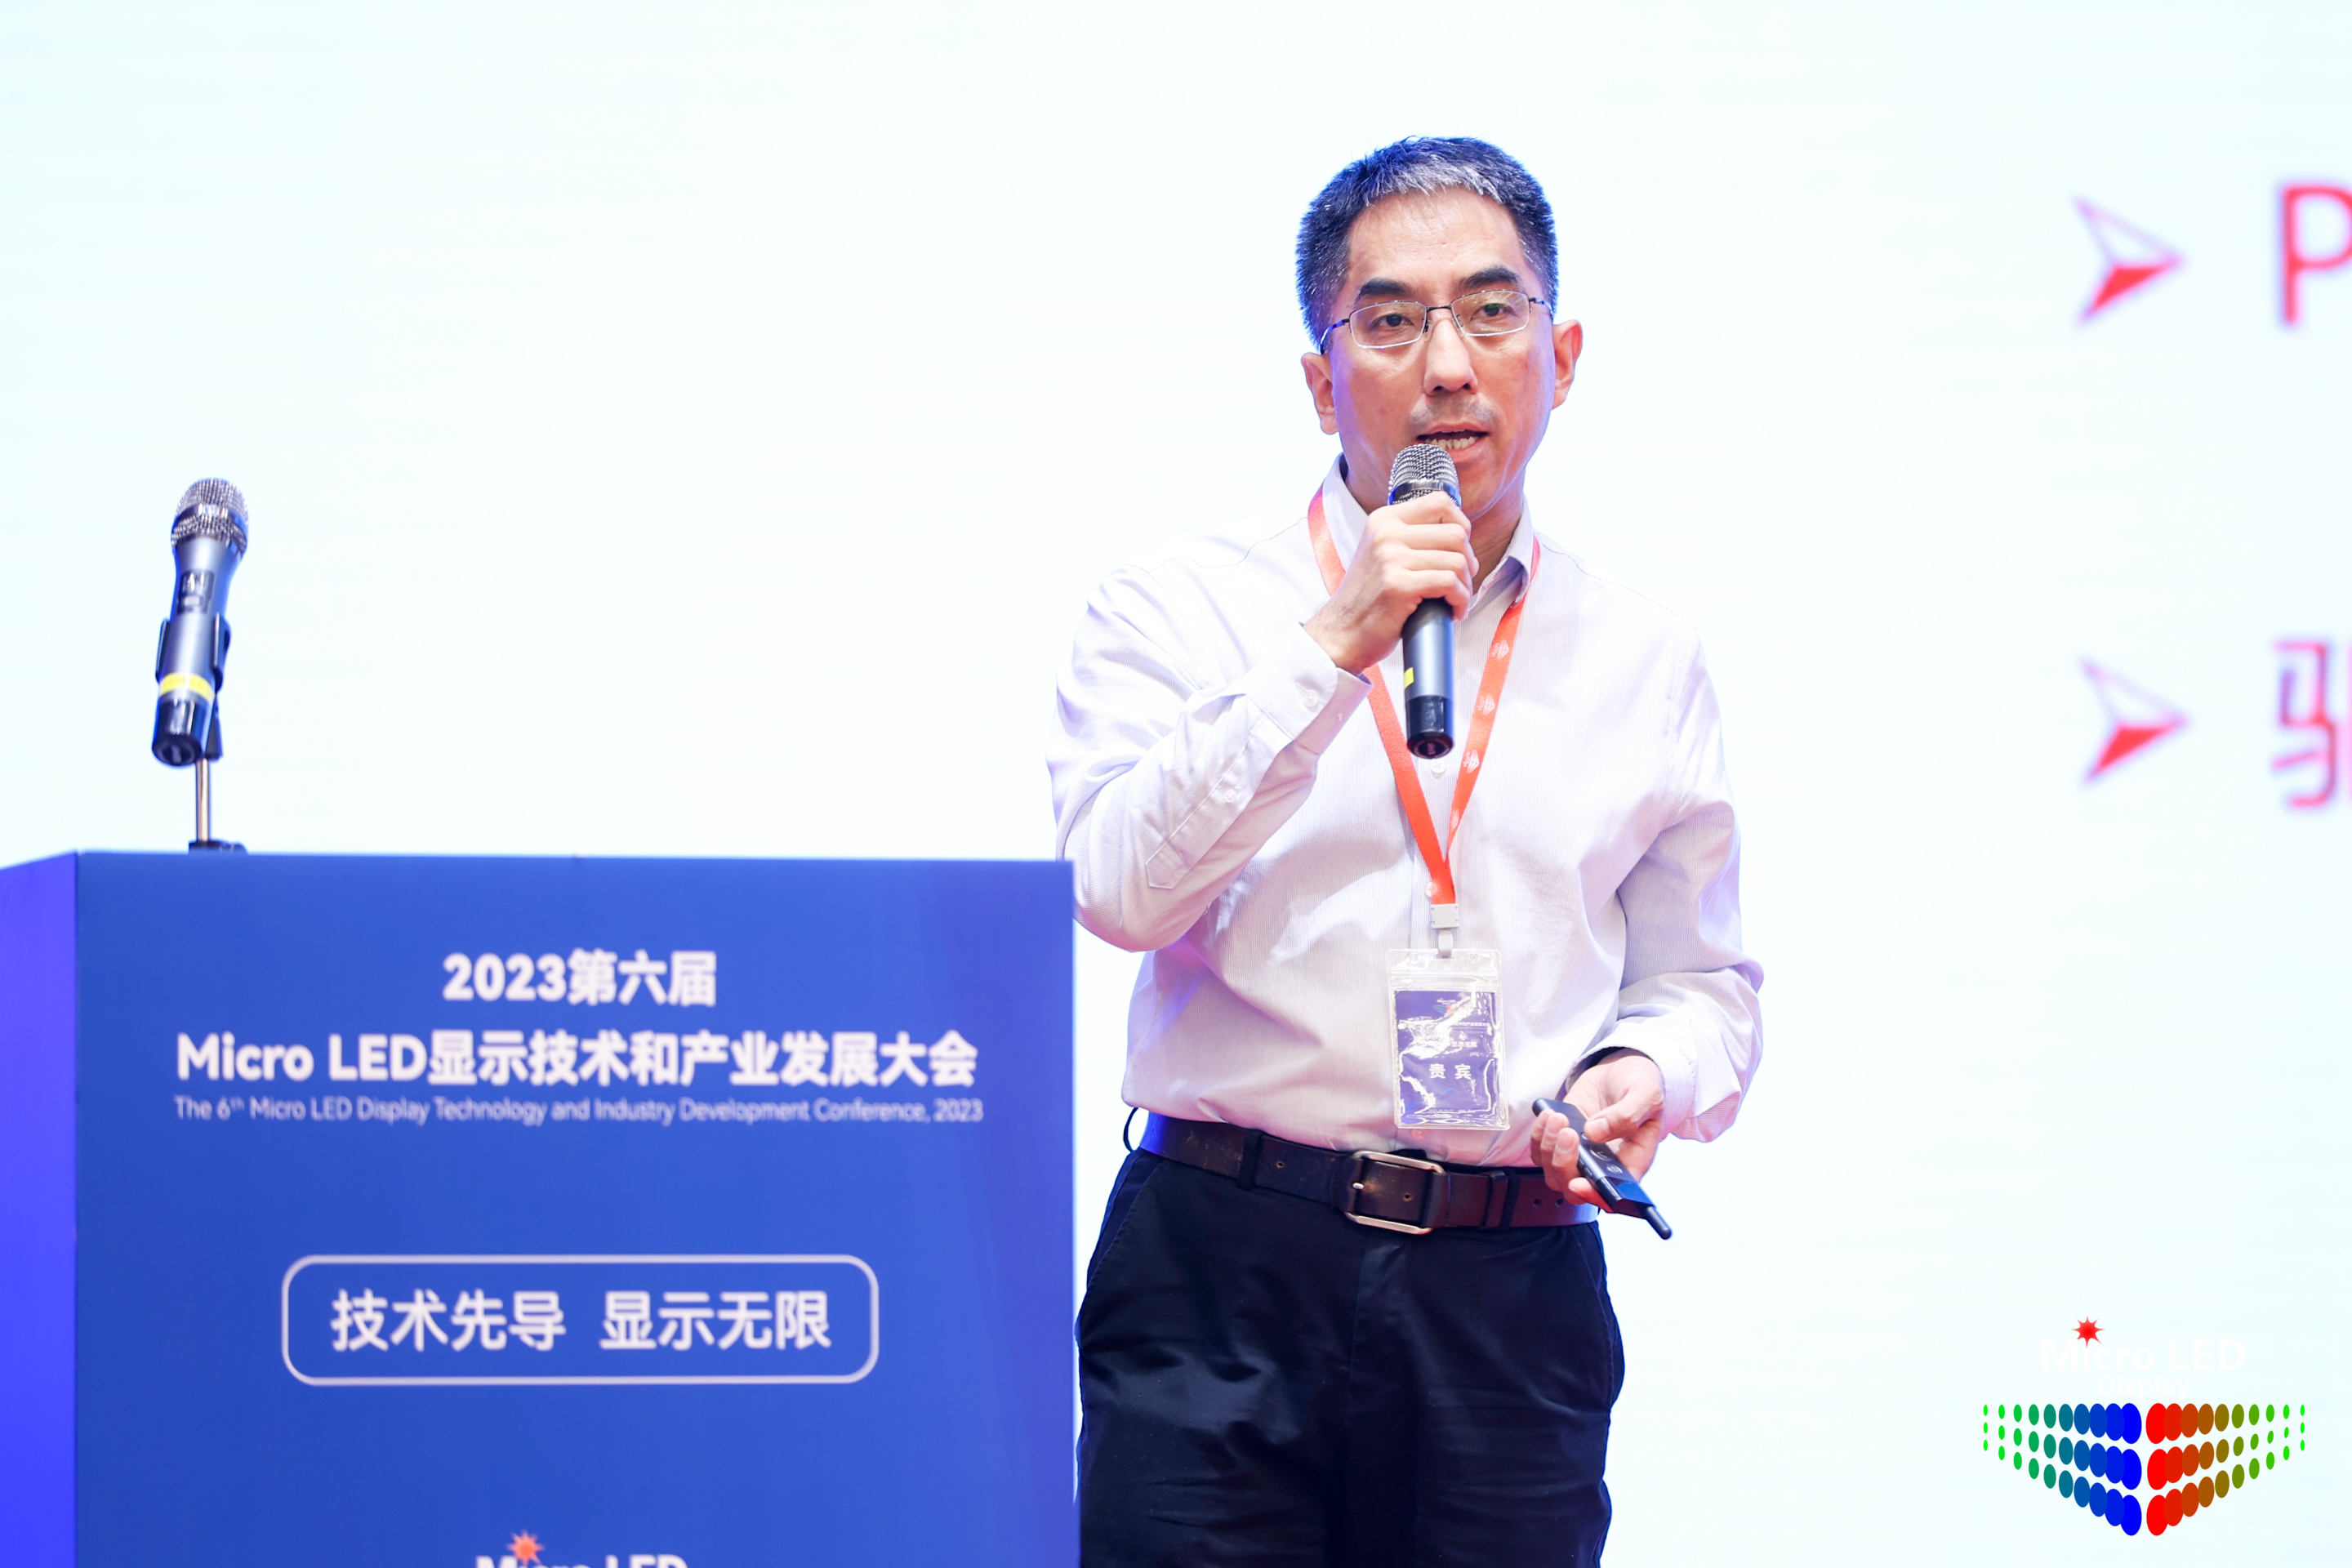 Geng Juncheng, Vice President of Chipone, attended the 6th China (International) Micro LED Display Technology and Industry Development Conference 2023 and delivered a speech   